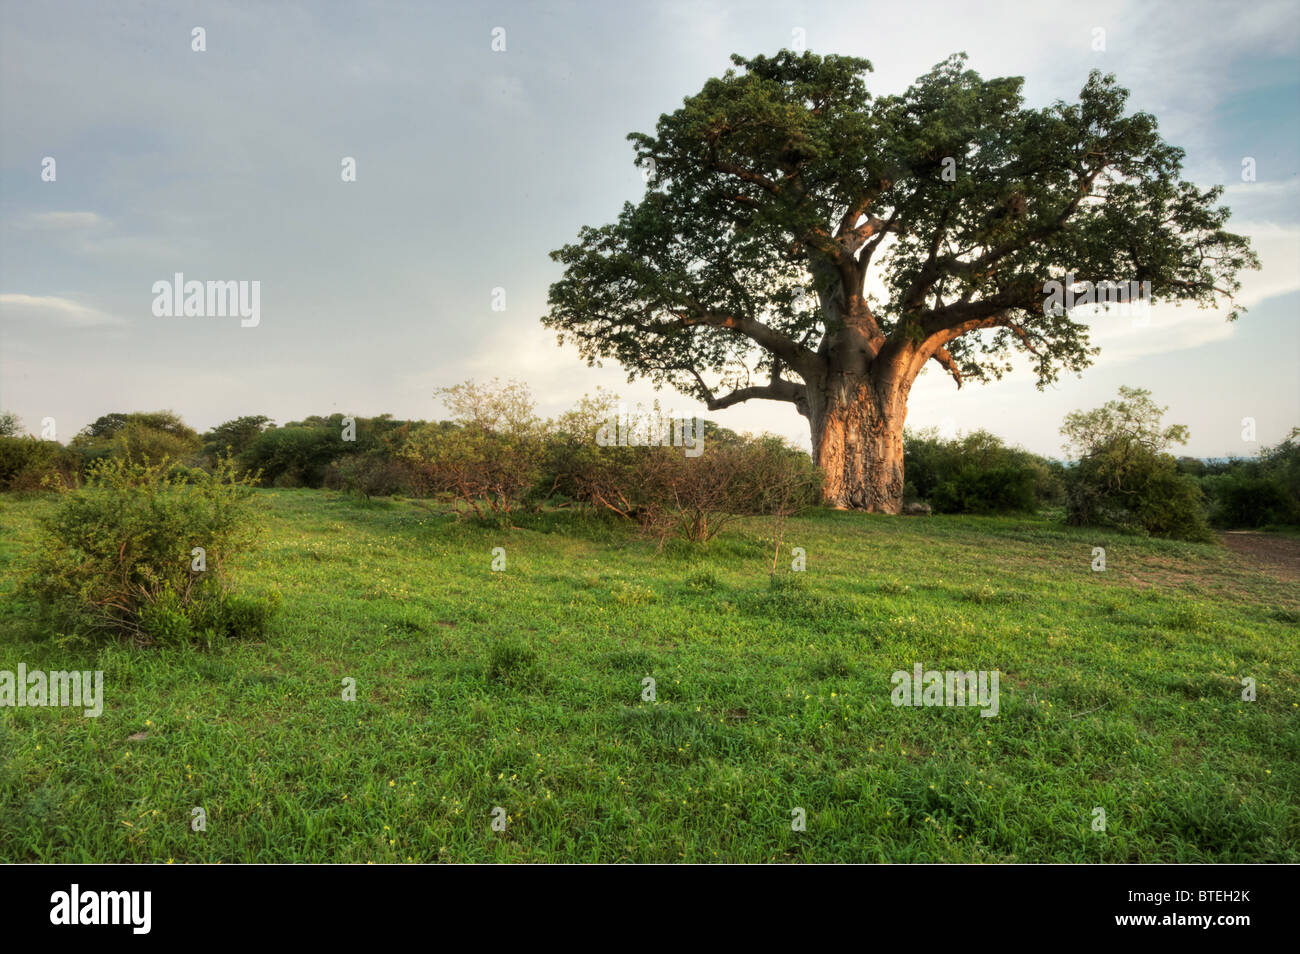 Baobab tree surrounded by a short lush grassland in the late afternoon light Stock Photo